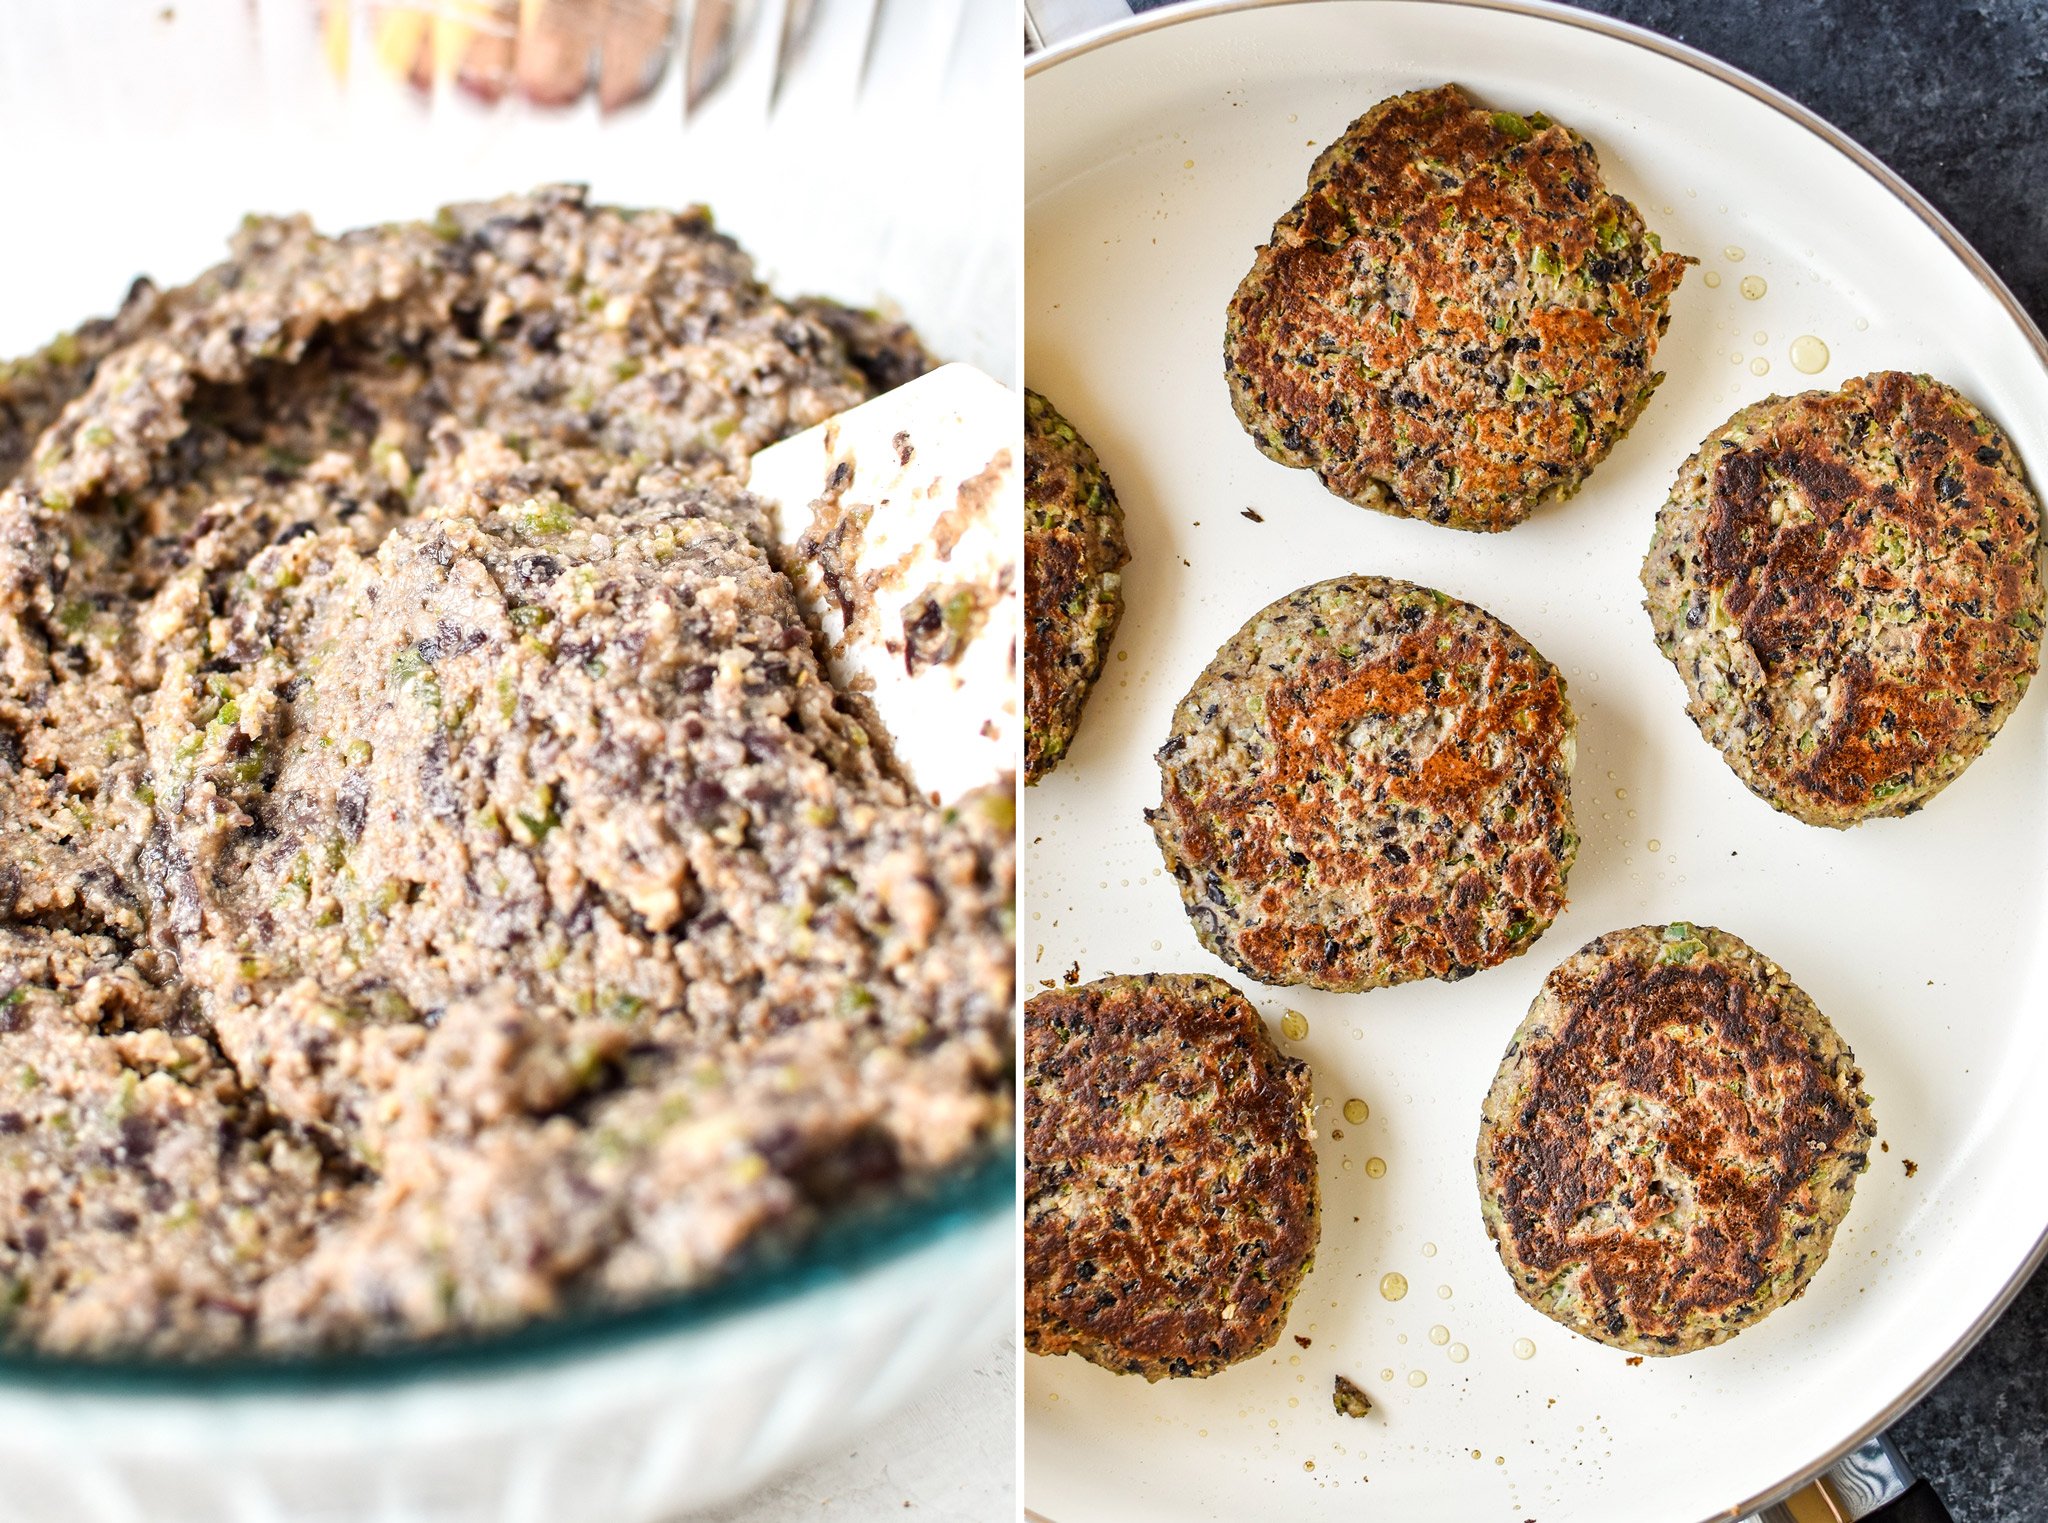 Left: Black bean burger mixture with the breadcrumbs completely stirred in. Right: Cooking 6 freezer friendly black bean burgers.